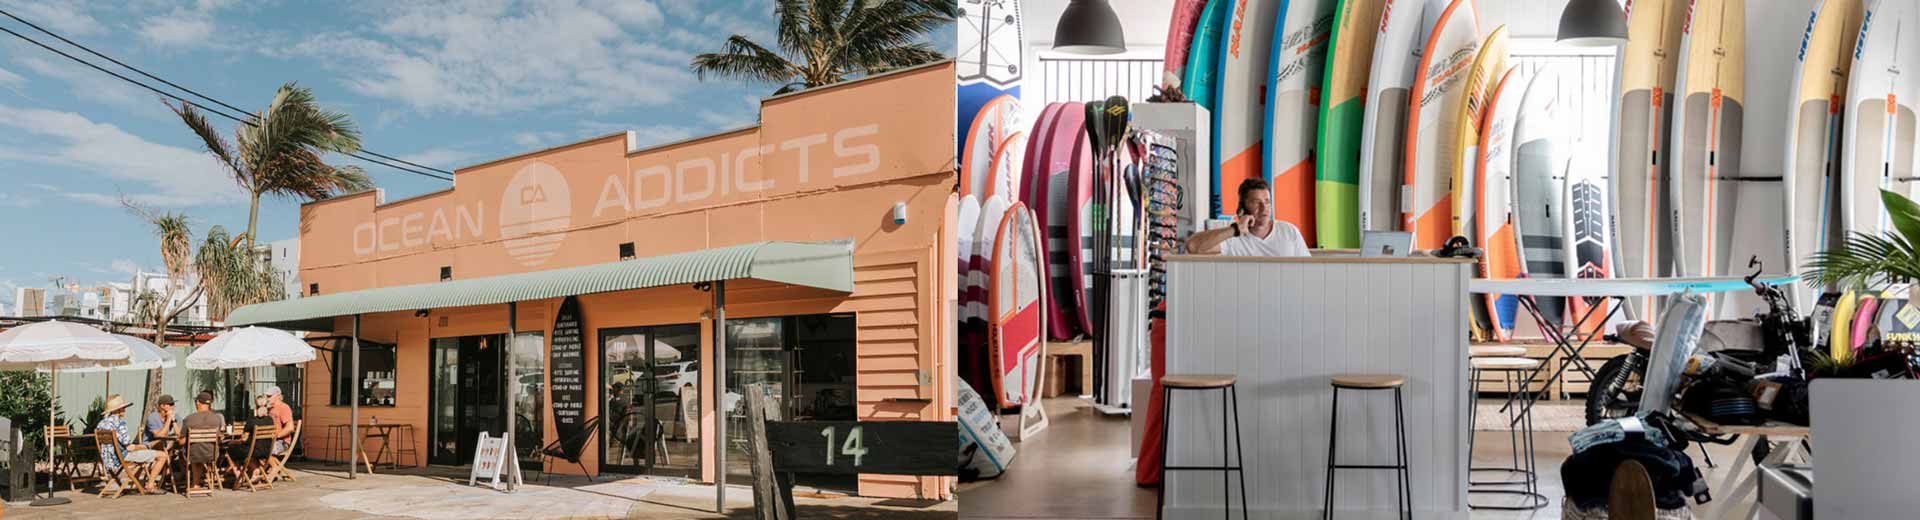 Ocean Addicts SUP Kite and Foil Shop Maroochydore - Sunshine Coast - Local Store Cotton Tree